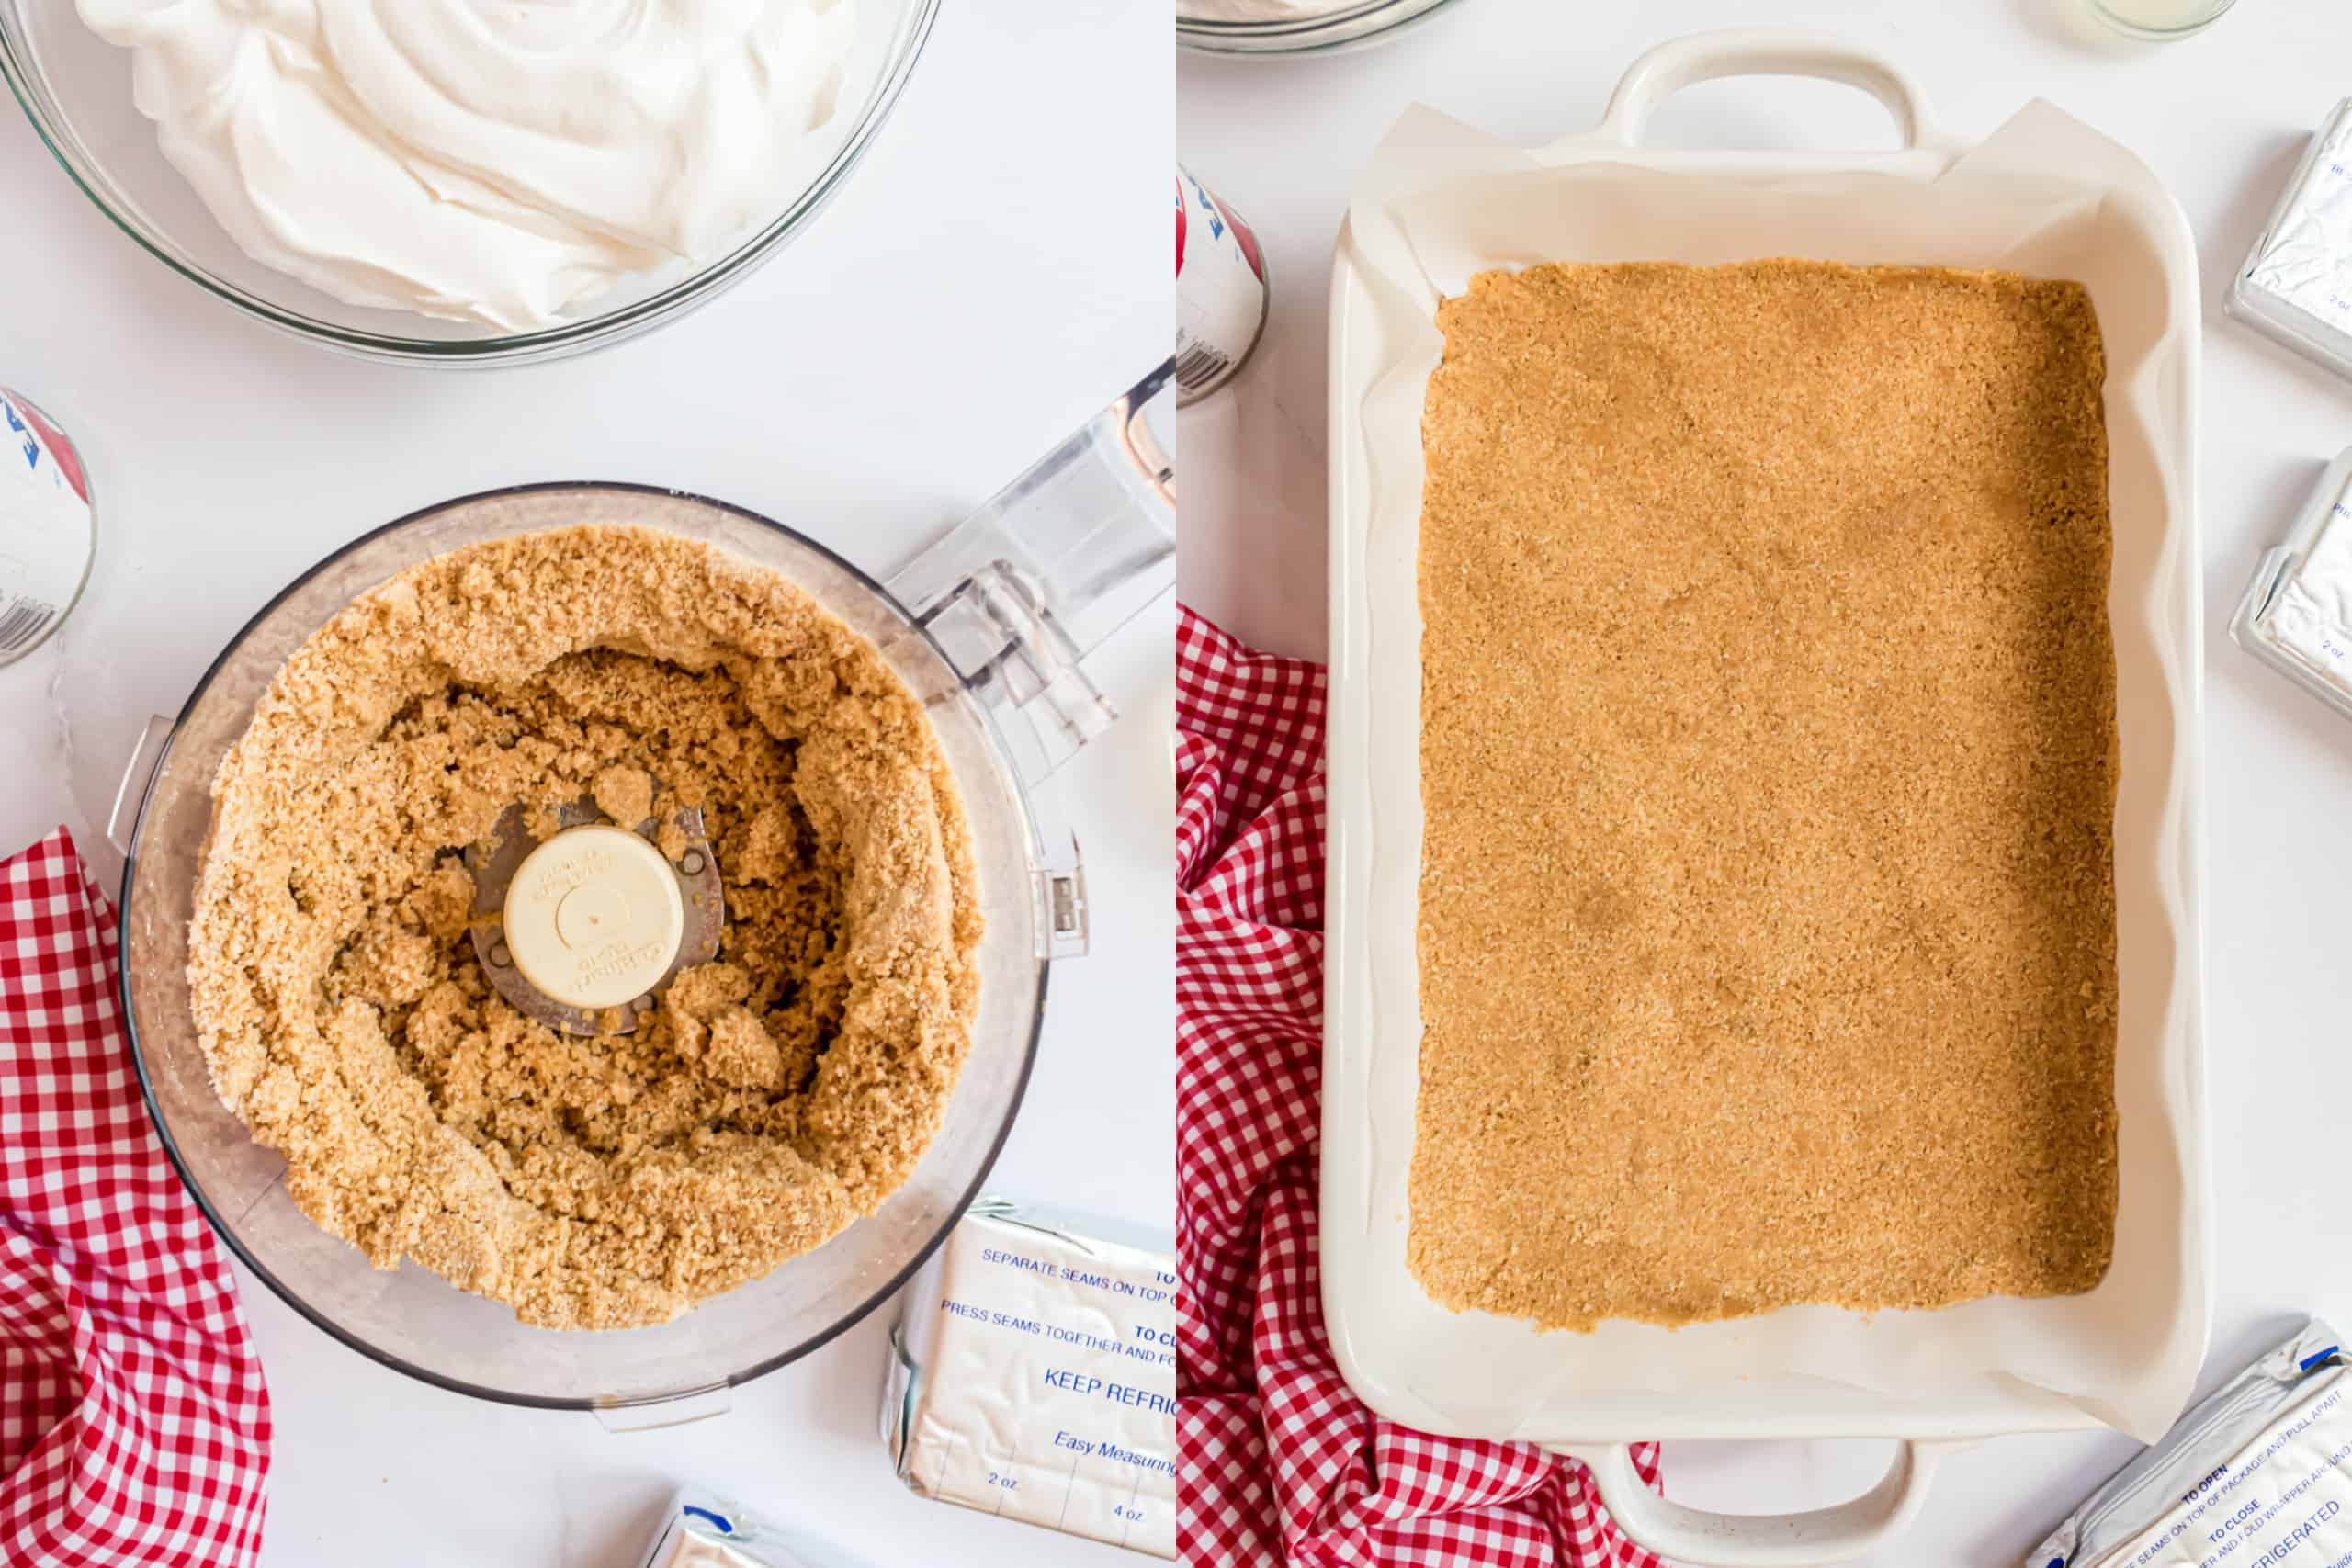 Step by step photos showing how to make cheesecake bar crust.